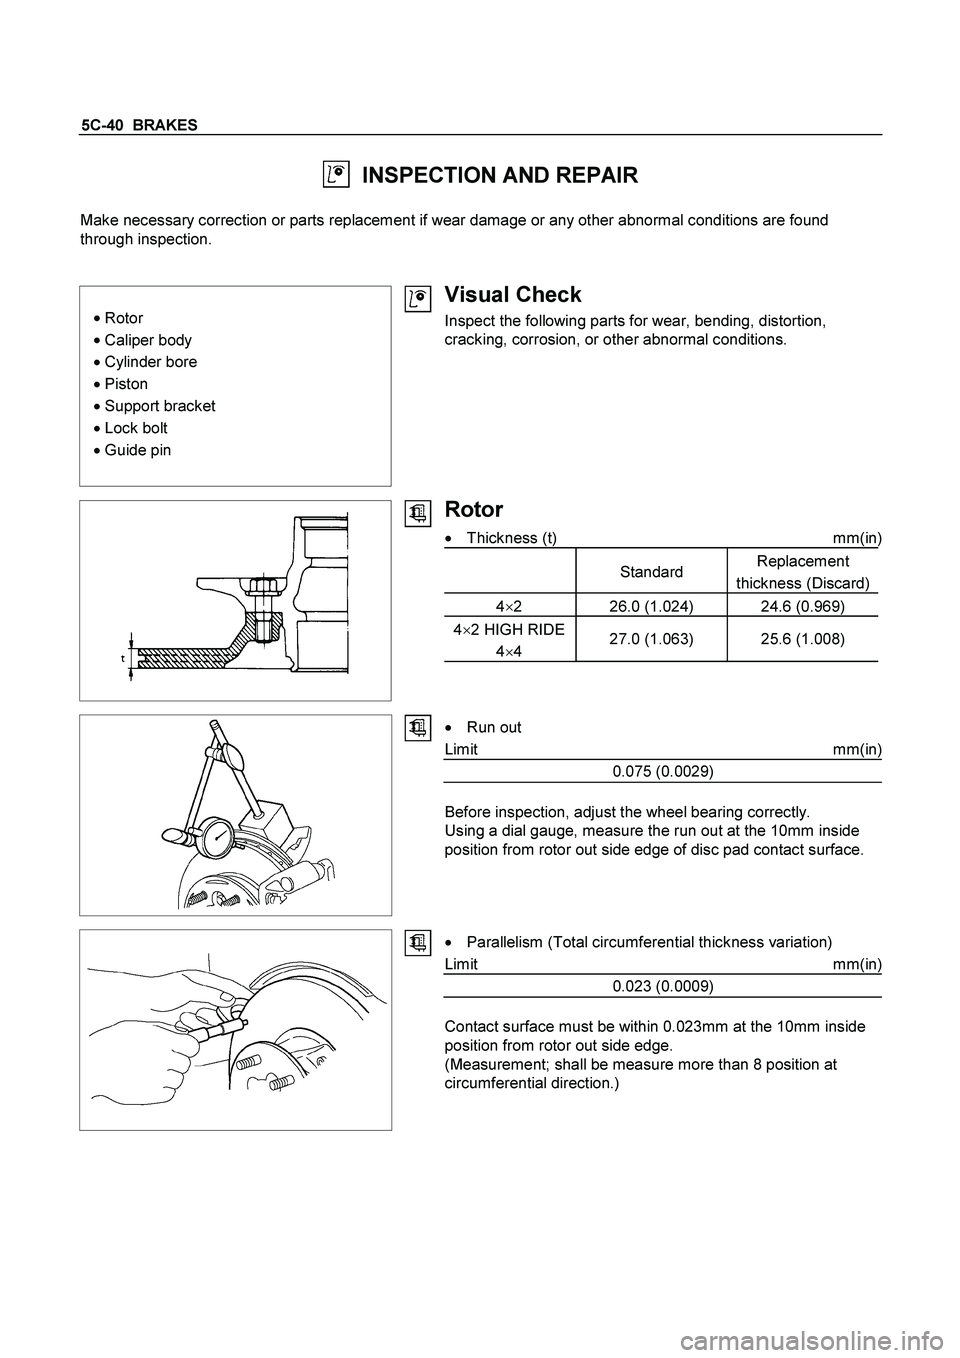 ISUZU TF SERIES 2004  Workshop Manual 5C-40  BRAKES 
  INSPECTION AND REPAIR 
 
Make necessary correction or parts replacement if wear damage or any other abnormal conditions are found 
through inspection. 
 
 
 

 Rotor 

 Caliper body